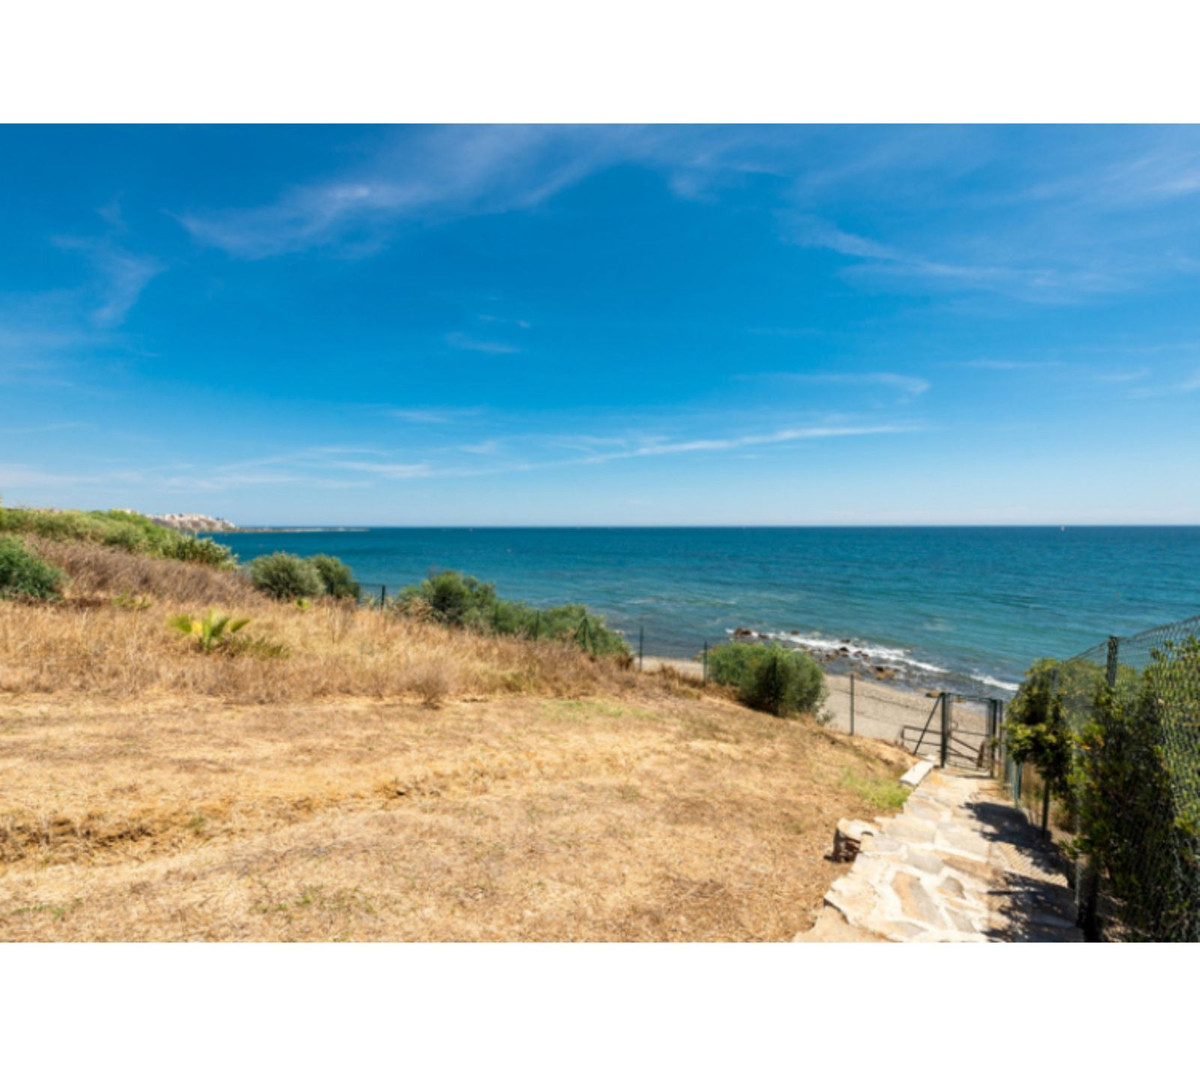 FRONTLINE BEACH VILLA PLOT FOR 4 NEW MODERN HOMES ABSOLUTELY BEACHFRONT AND WALKING DISTANCE TO ESTE, Spain